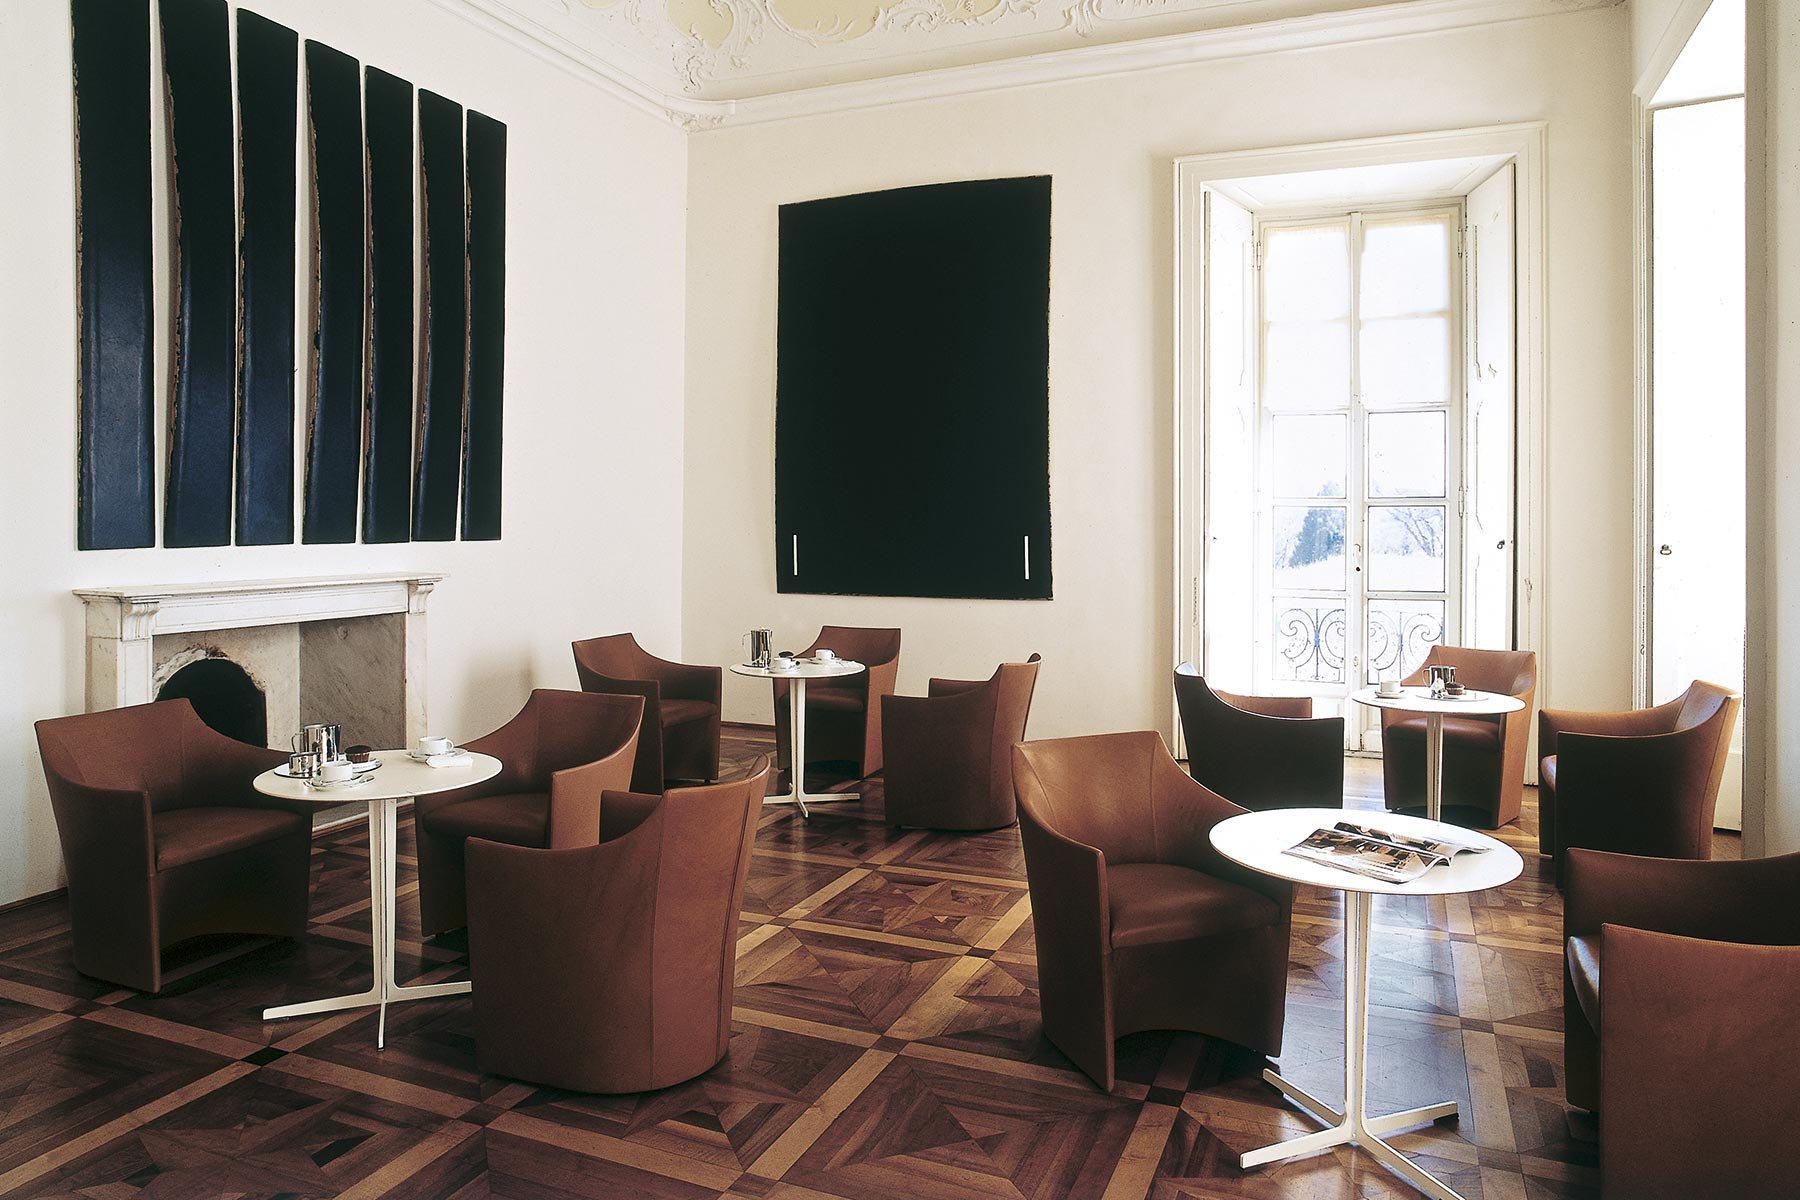 Mayfair Armchair lounge from Tacchini, designed by Christophe Pillet